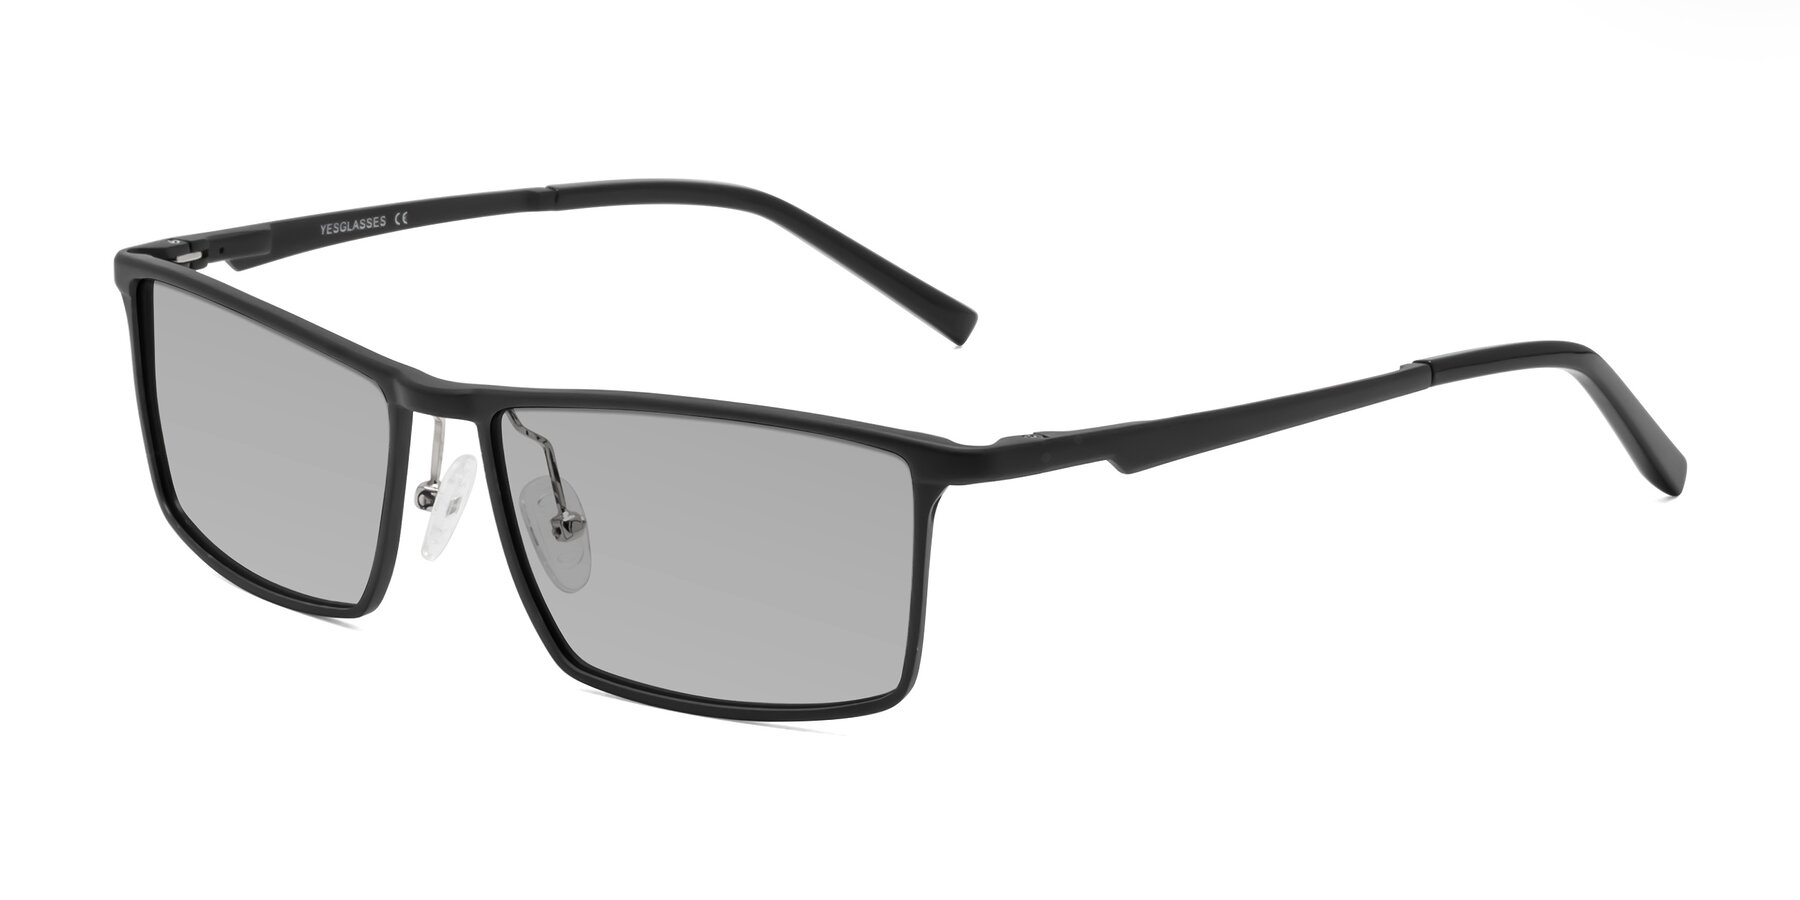 Angle of CX6330 in Black with Light Gray Tinted Lenses